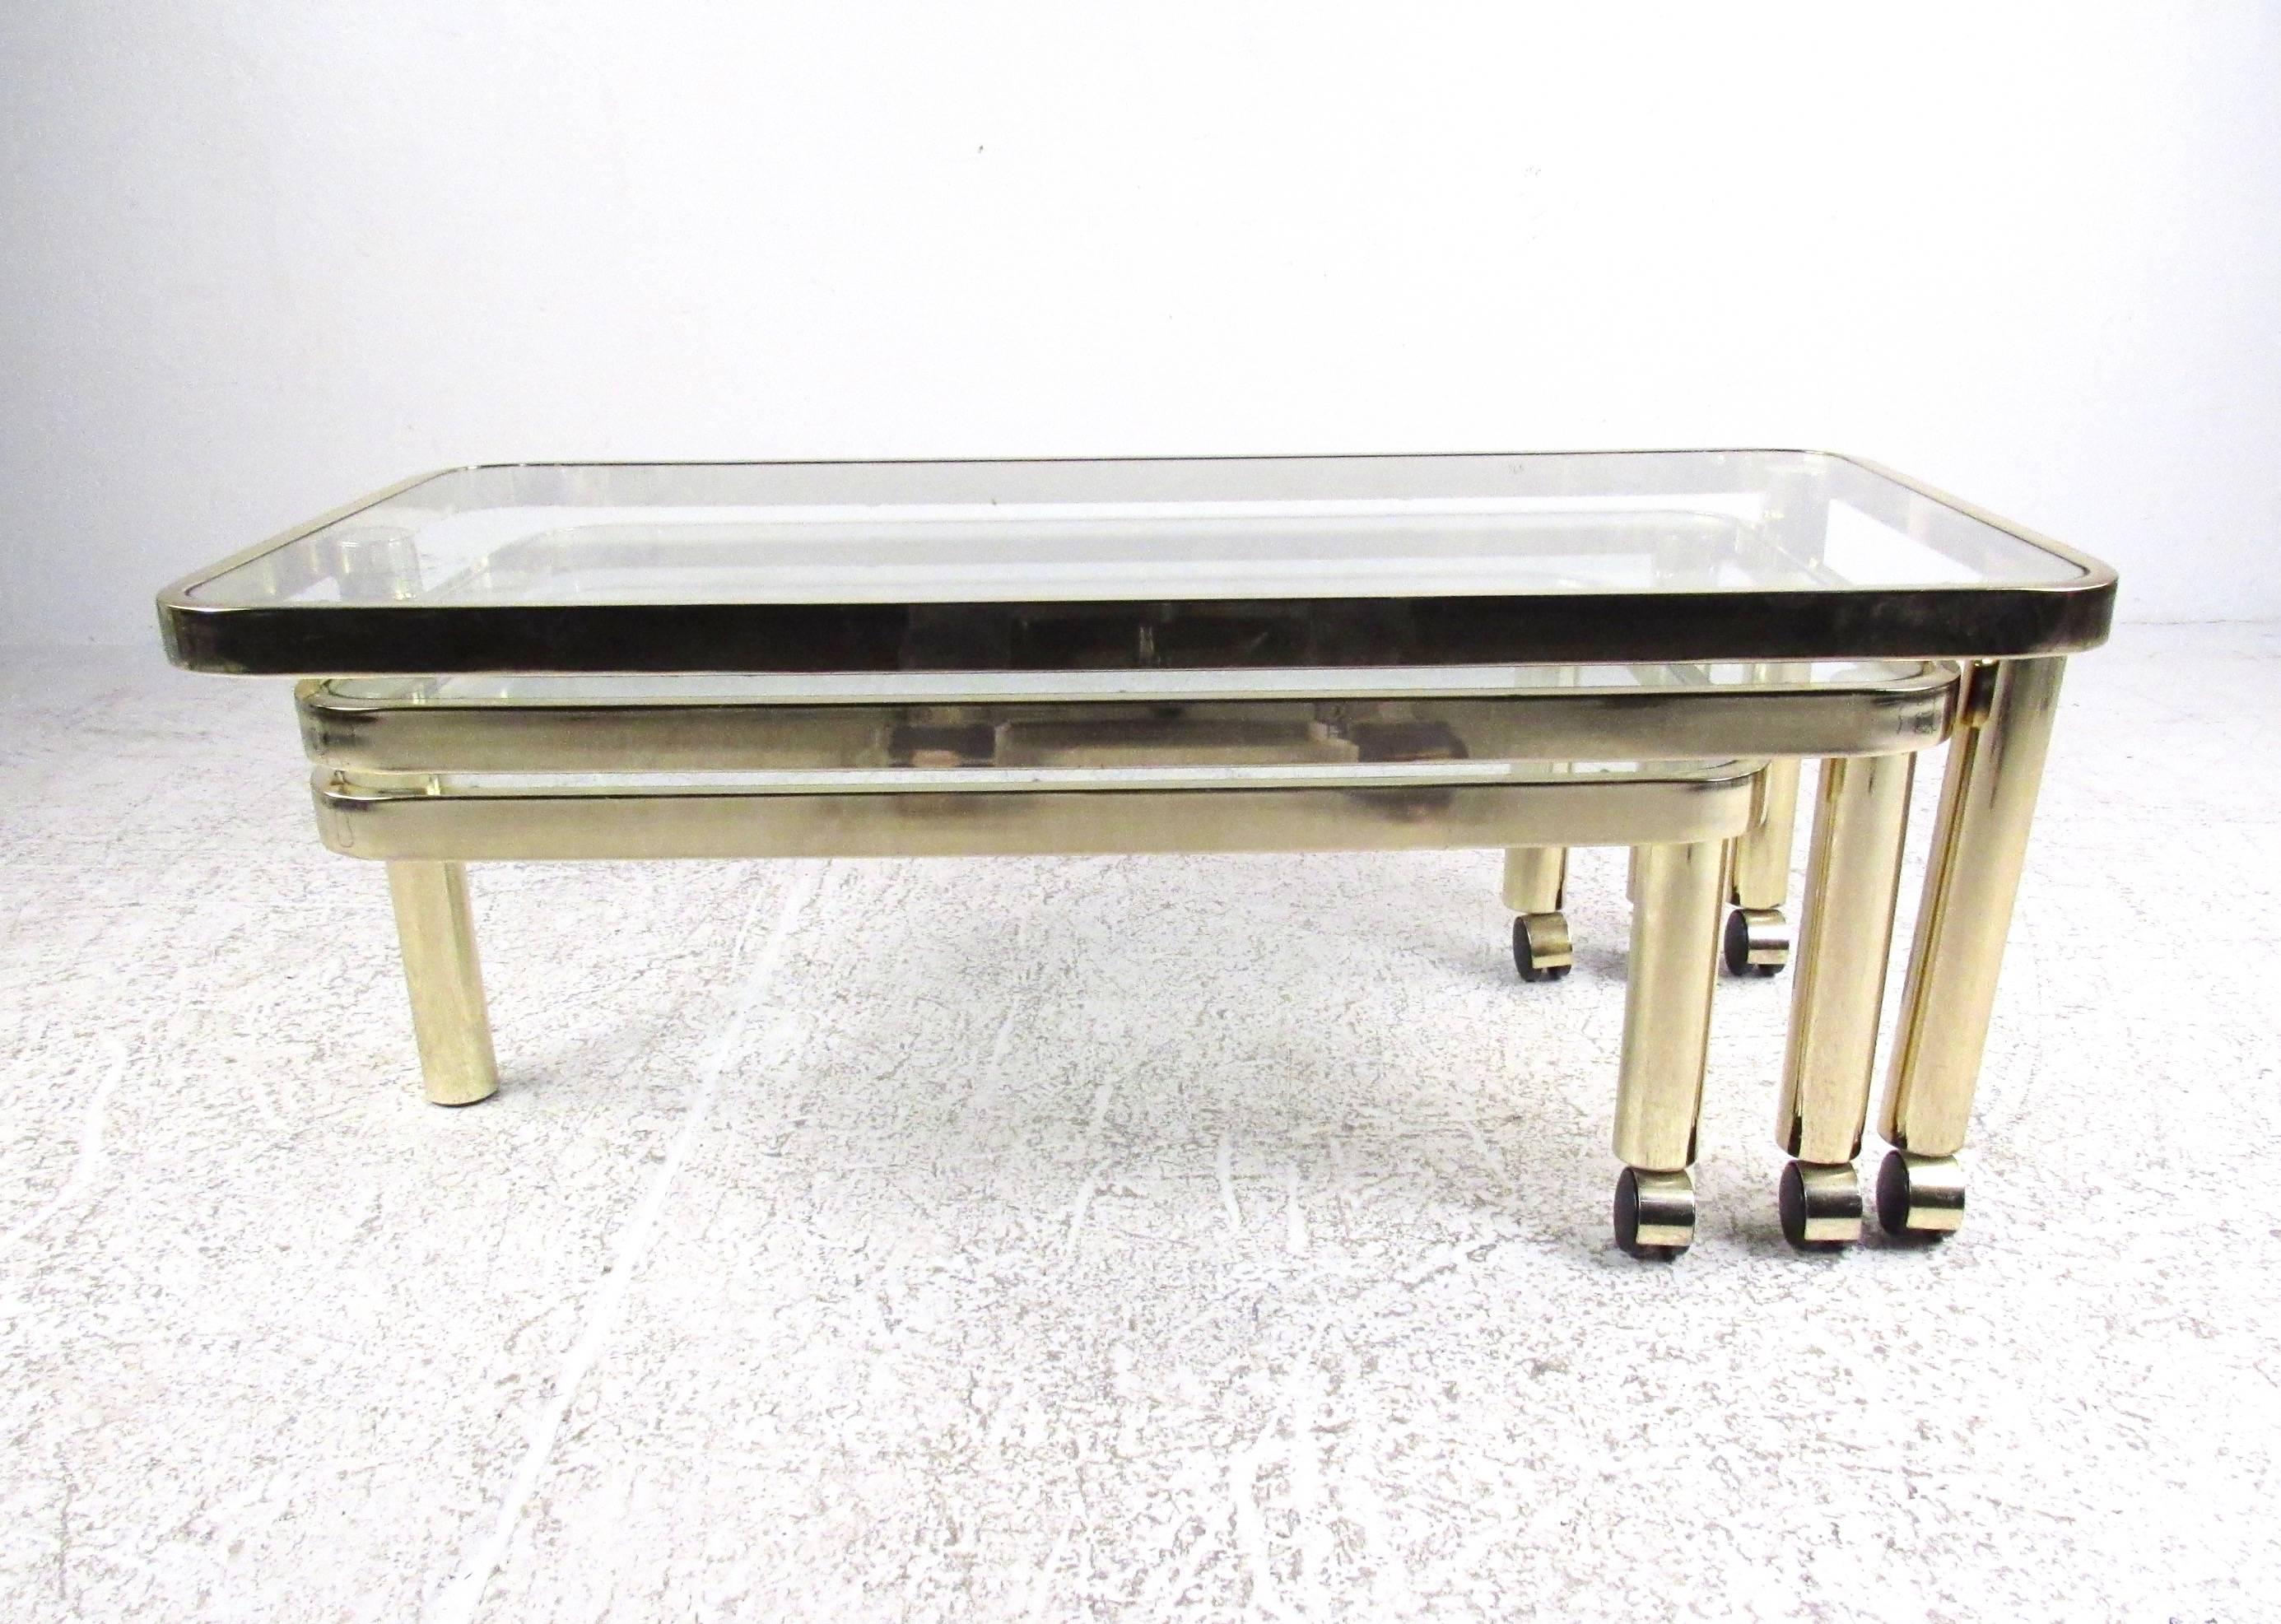 This stylish vintage brass coffee table features three separate table tops ranging in size from 32.5 inches wide to 42 inches, from 12 inches high to 16 inches tall. Design Institute of America created this unique three-tier cocktail table ideal for